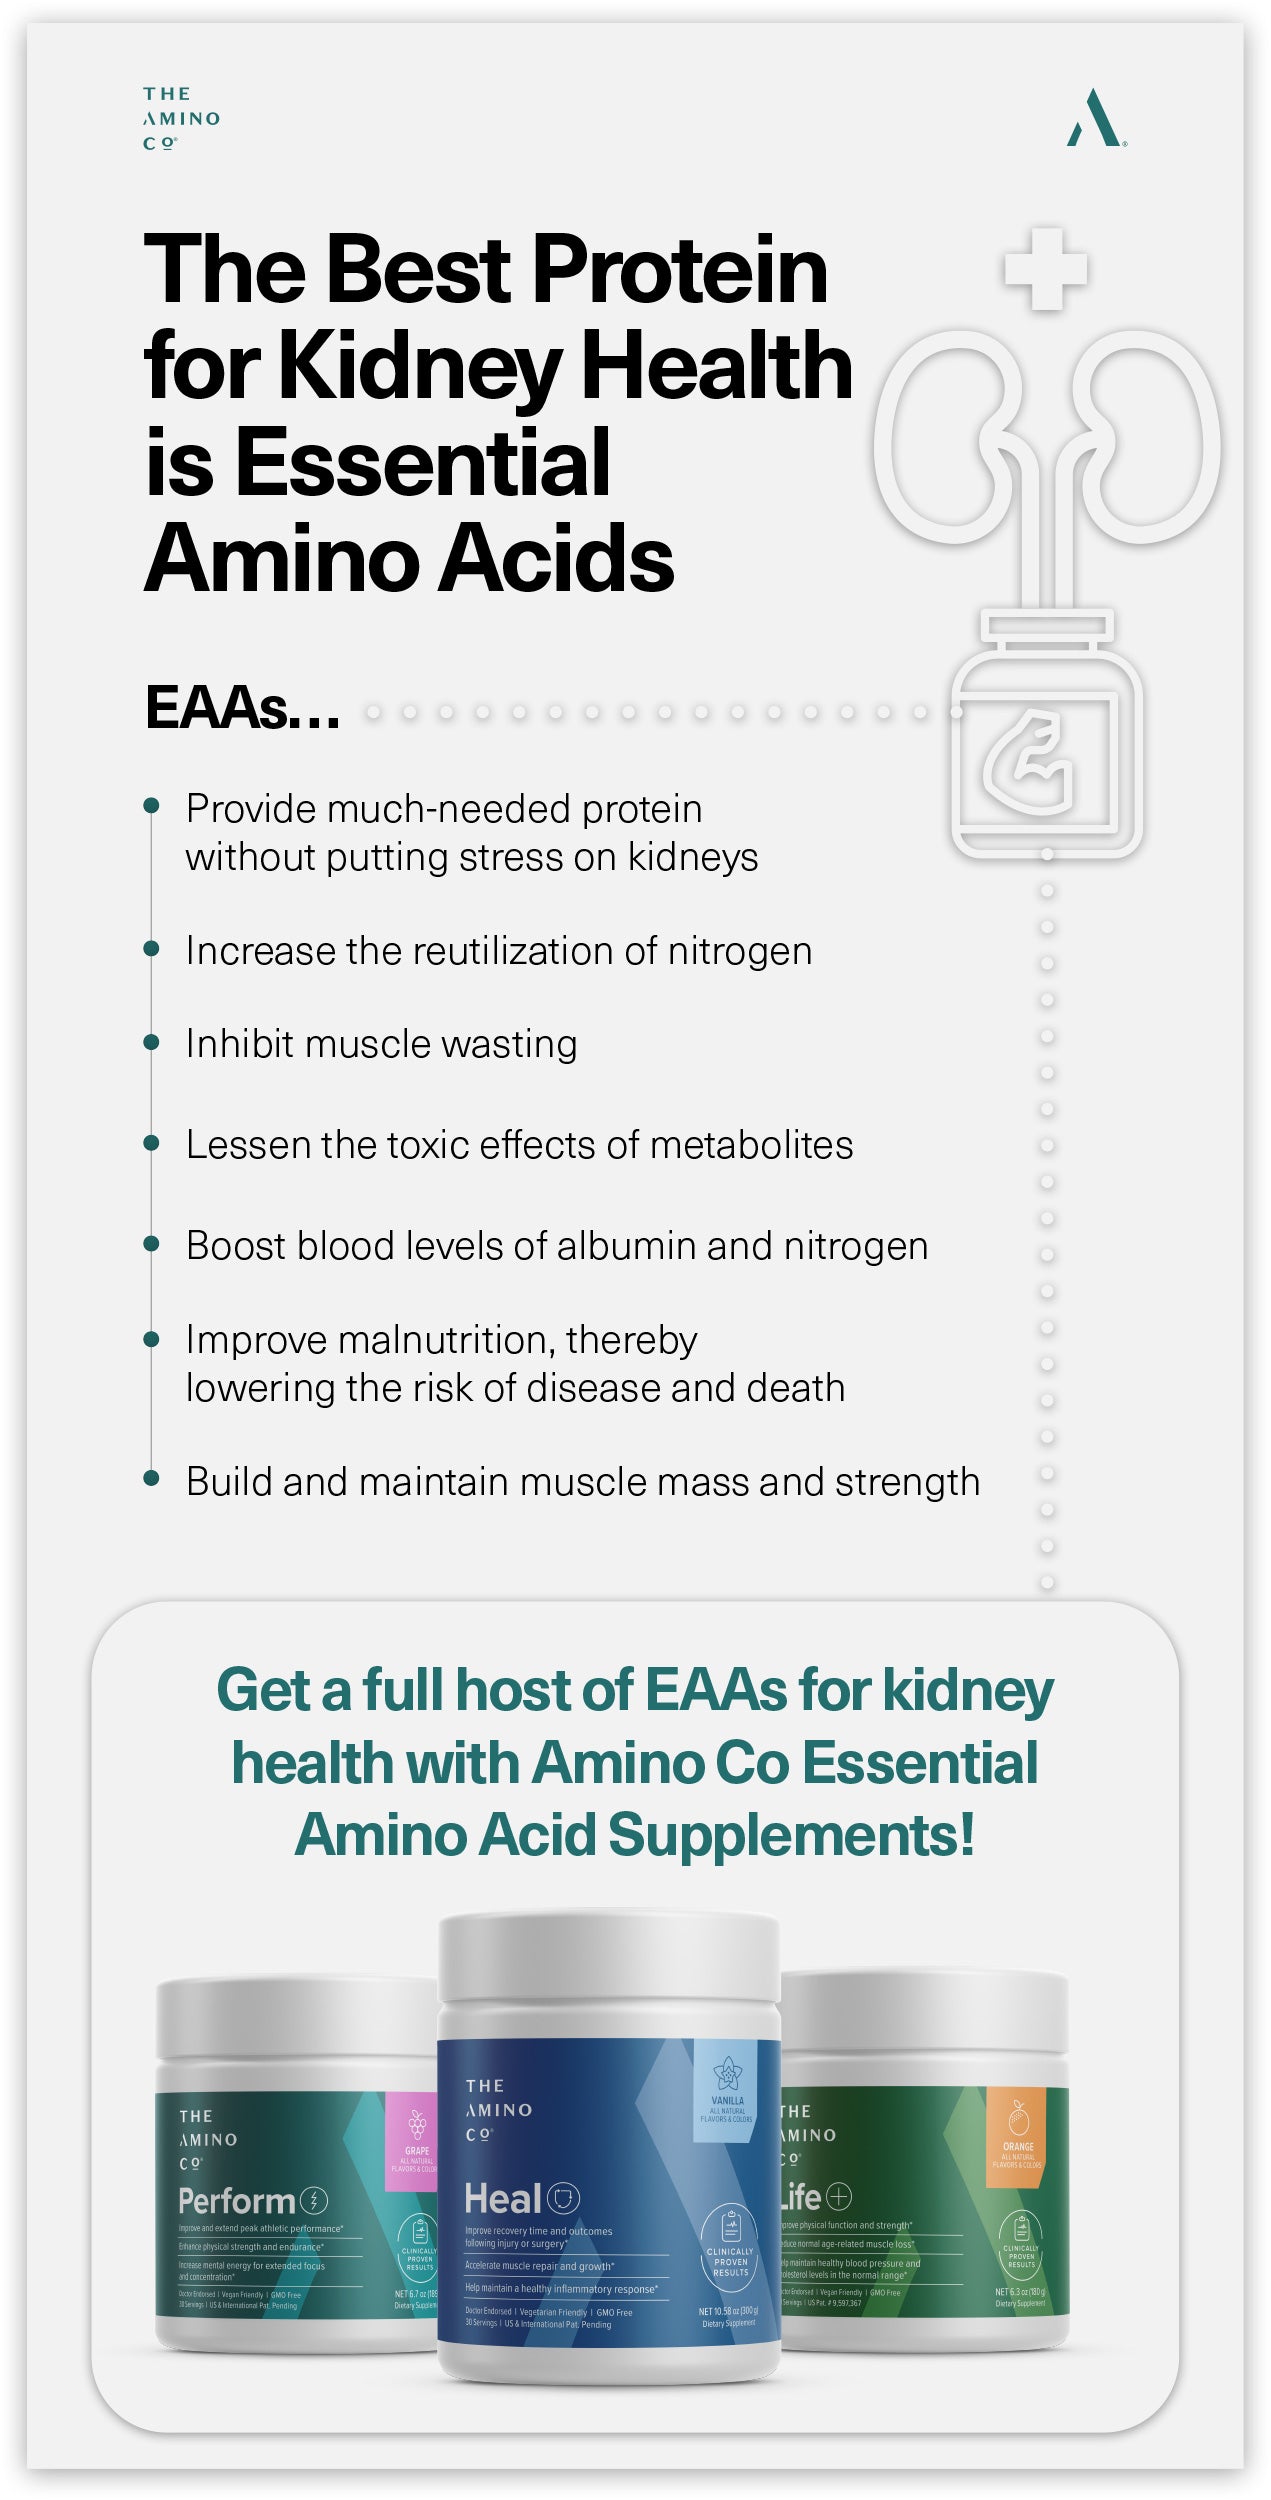 What protein is best for kidneys?